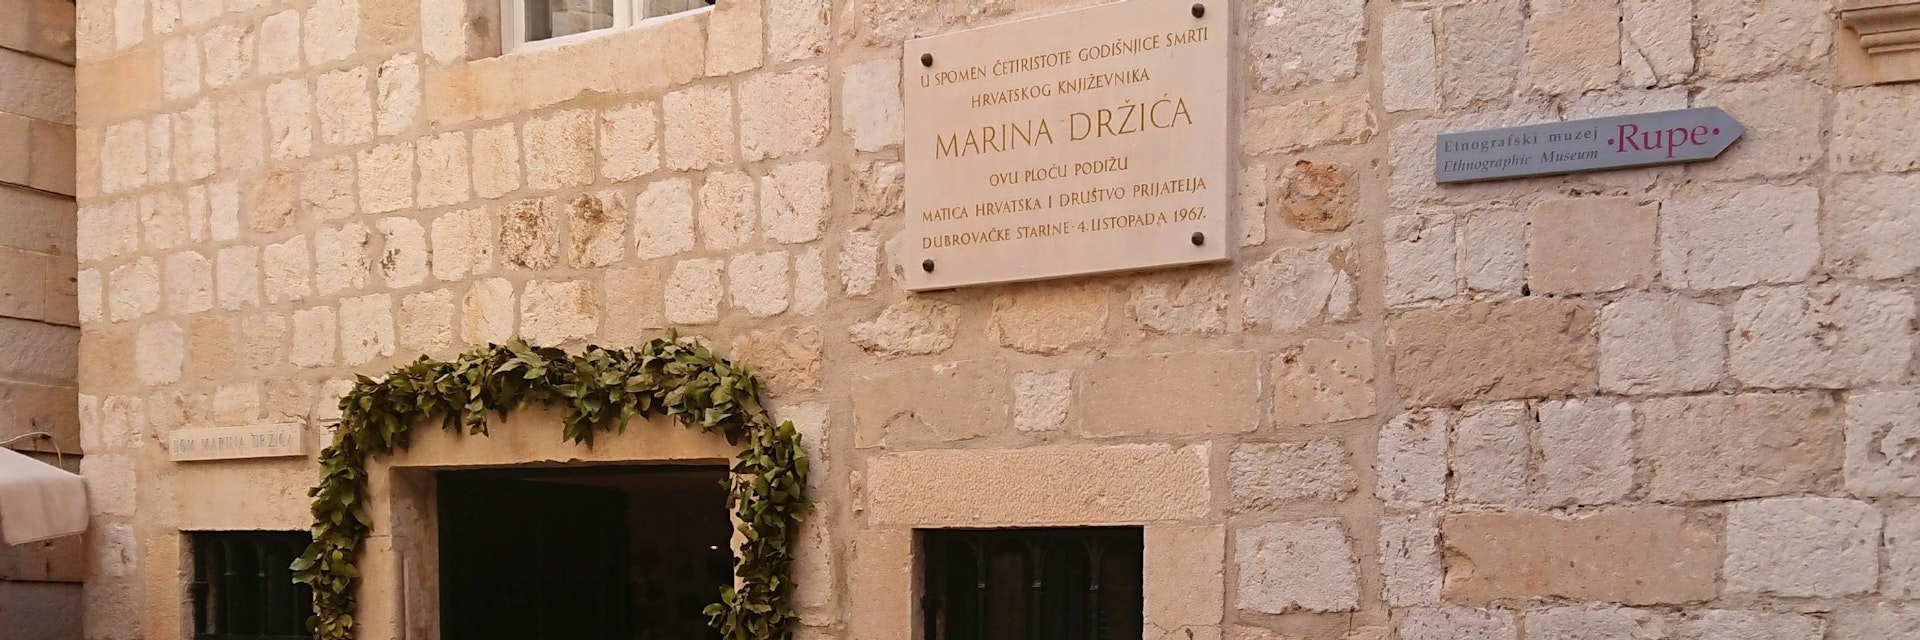 The front of the Marin Držić museum